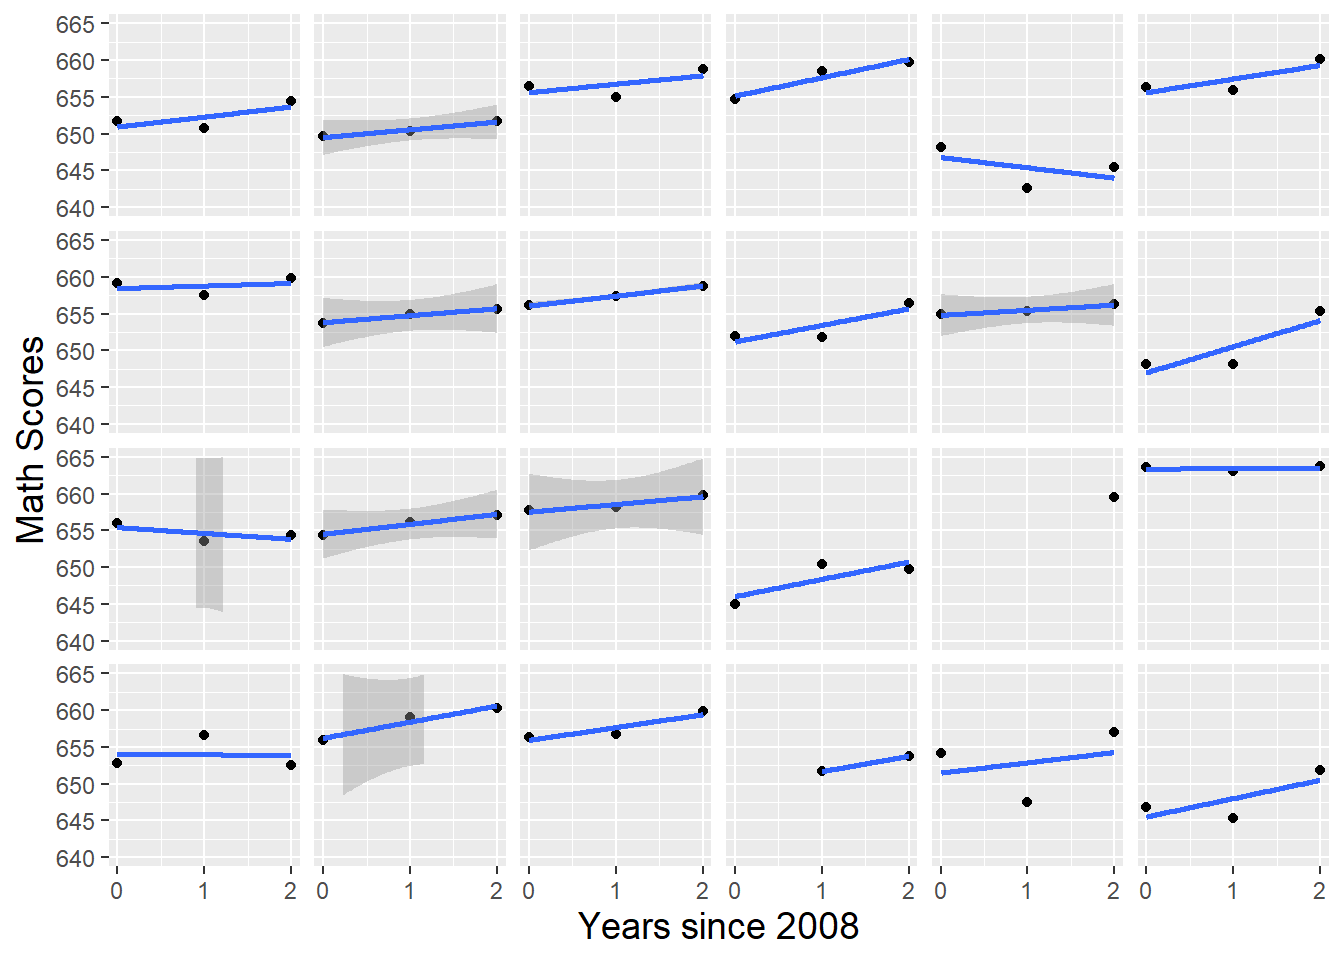  Lattice plot by school of math scores over time with linear fit for the first 24 schools in the data set.